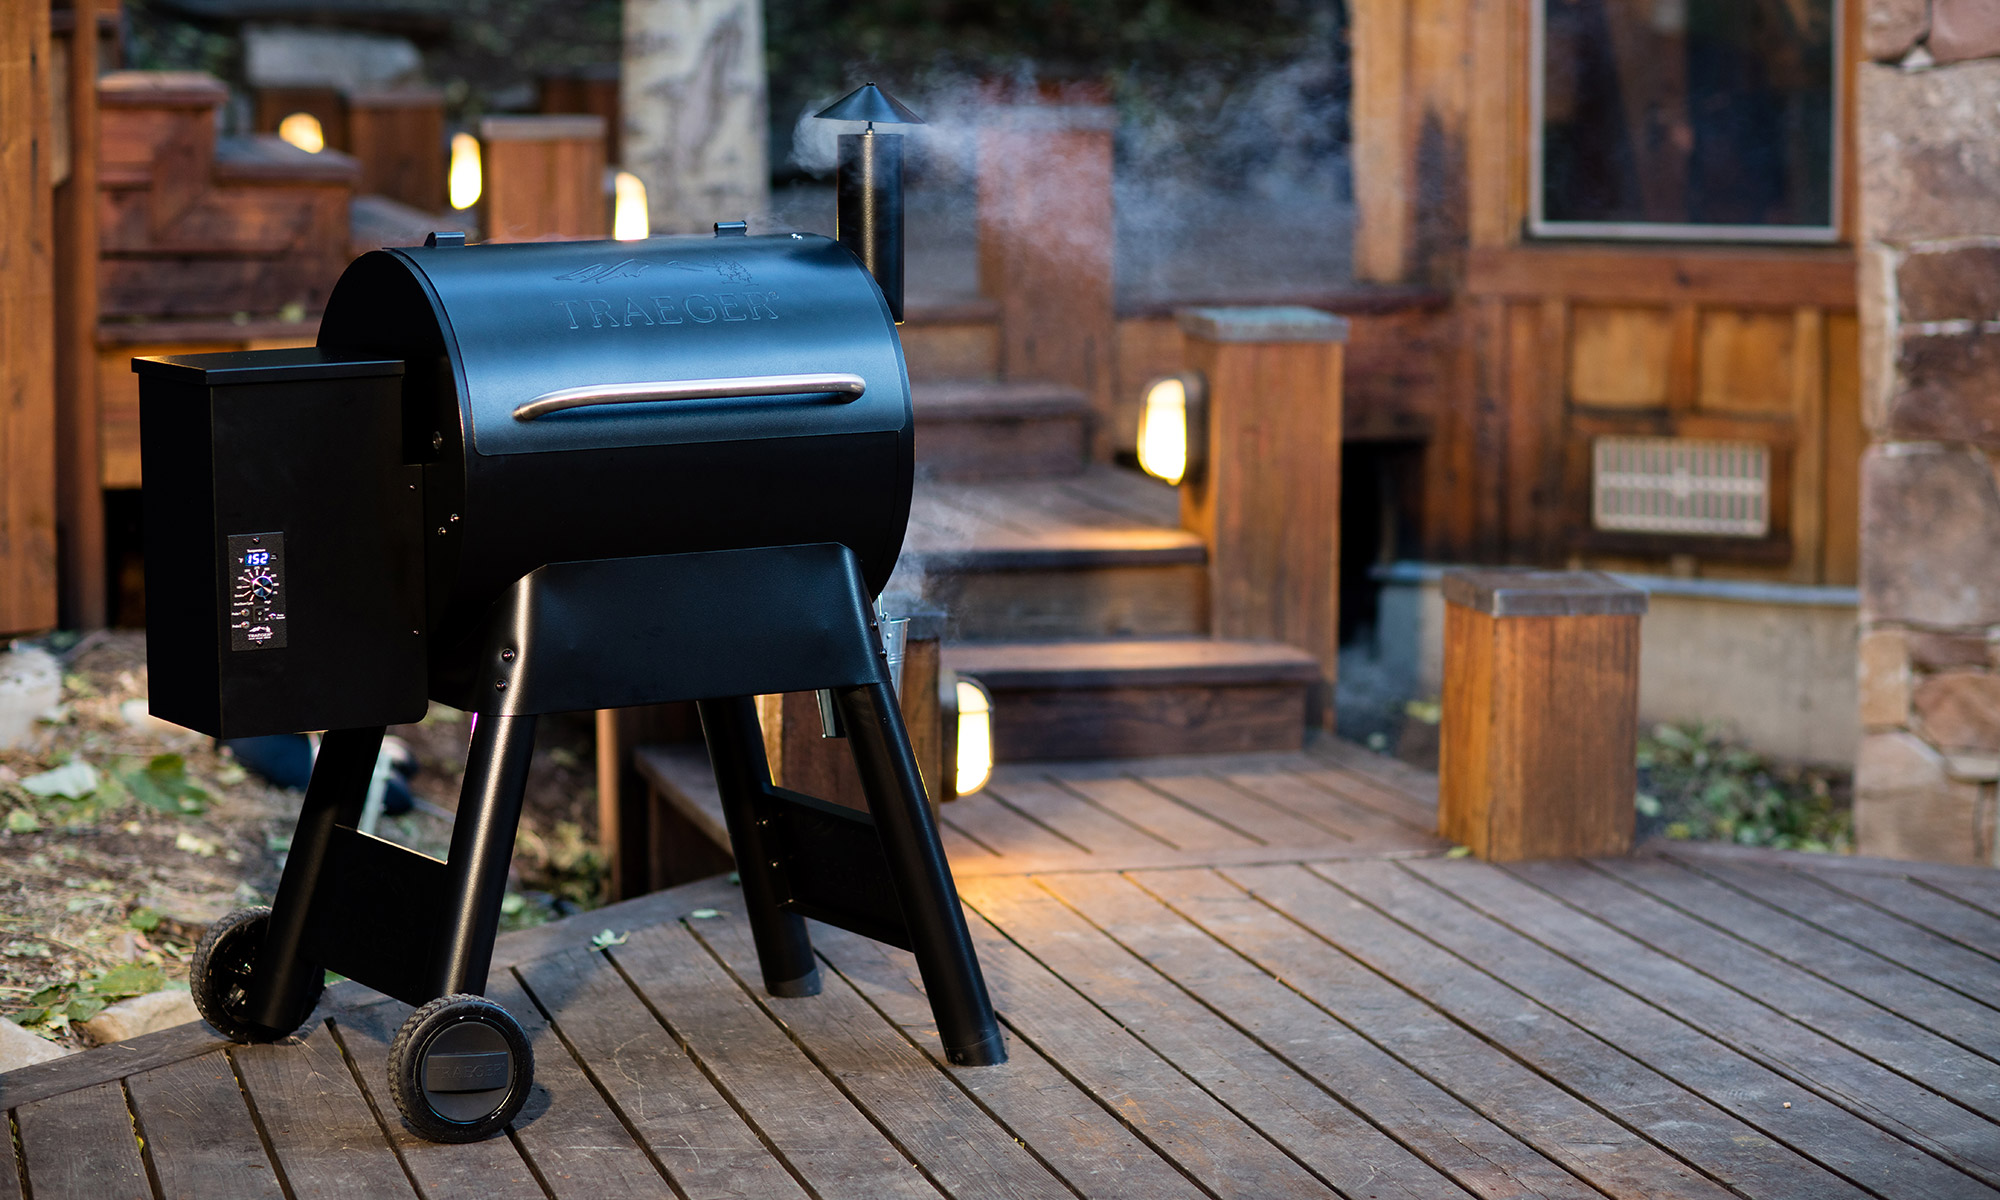 Charcoal barbecues / grills